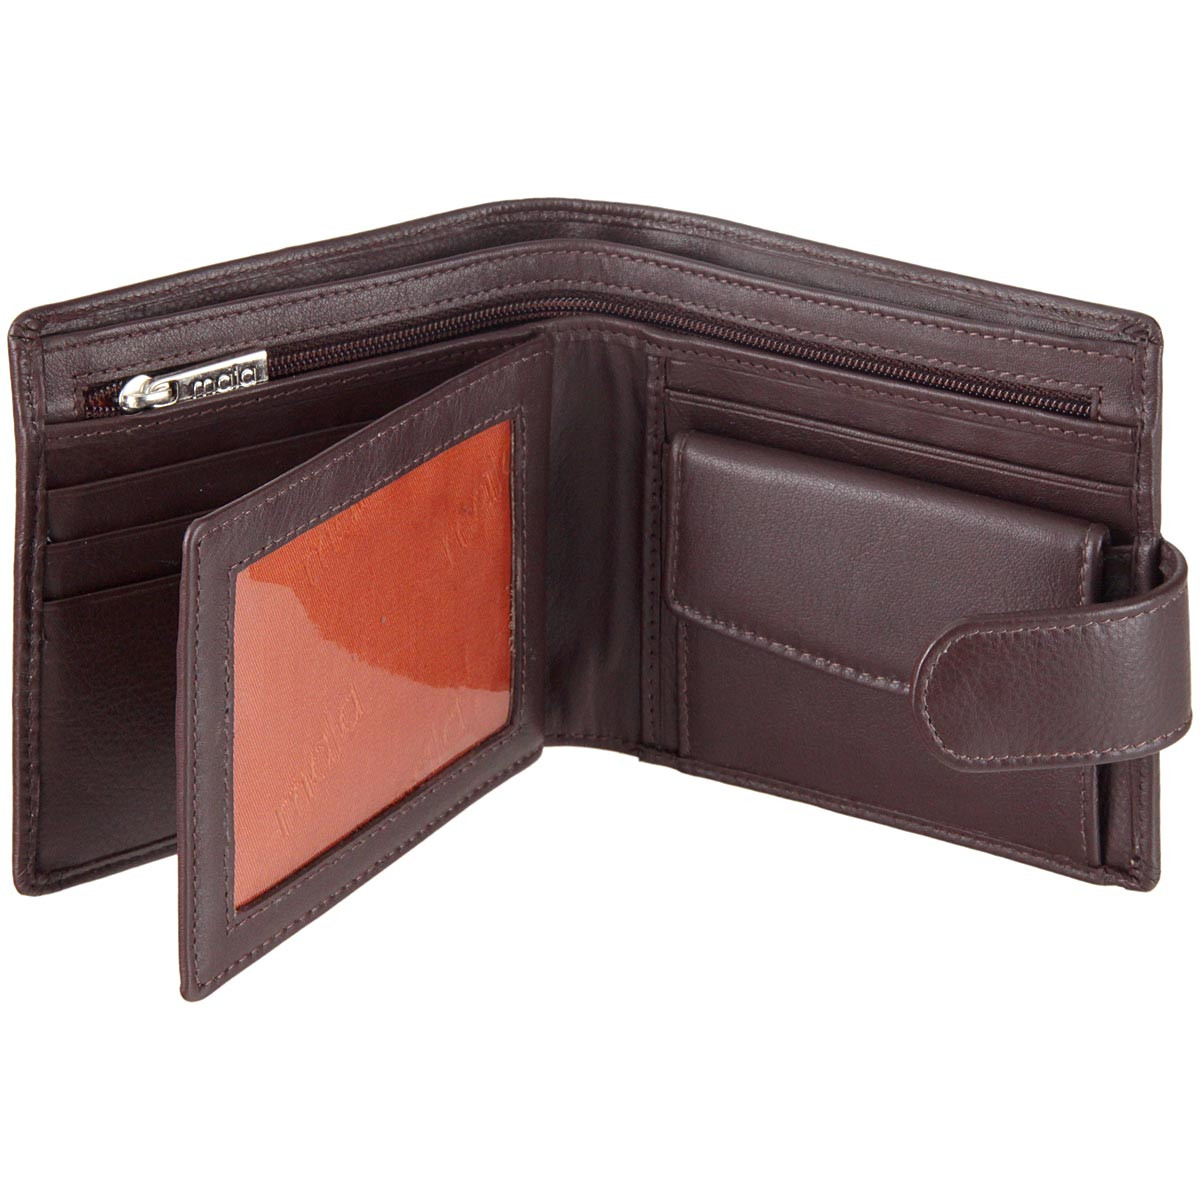 Leather Wallet with RFID Blocking: Mala 127 Brown